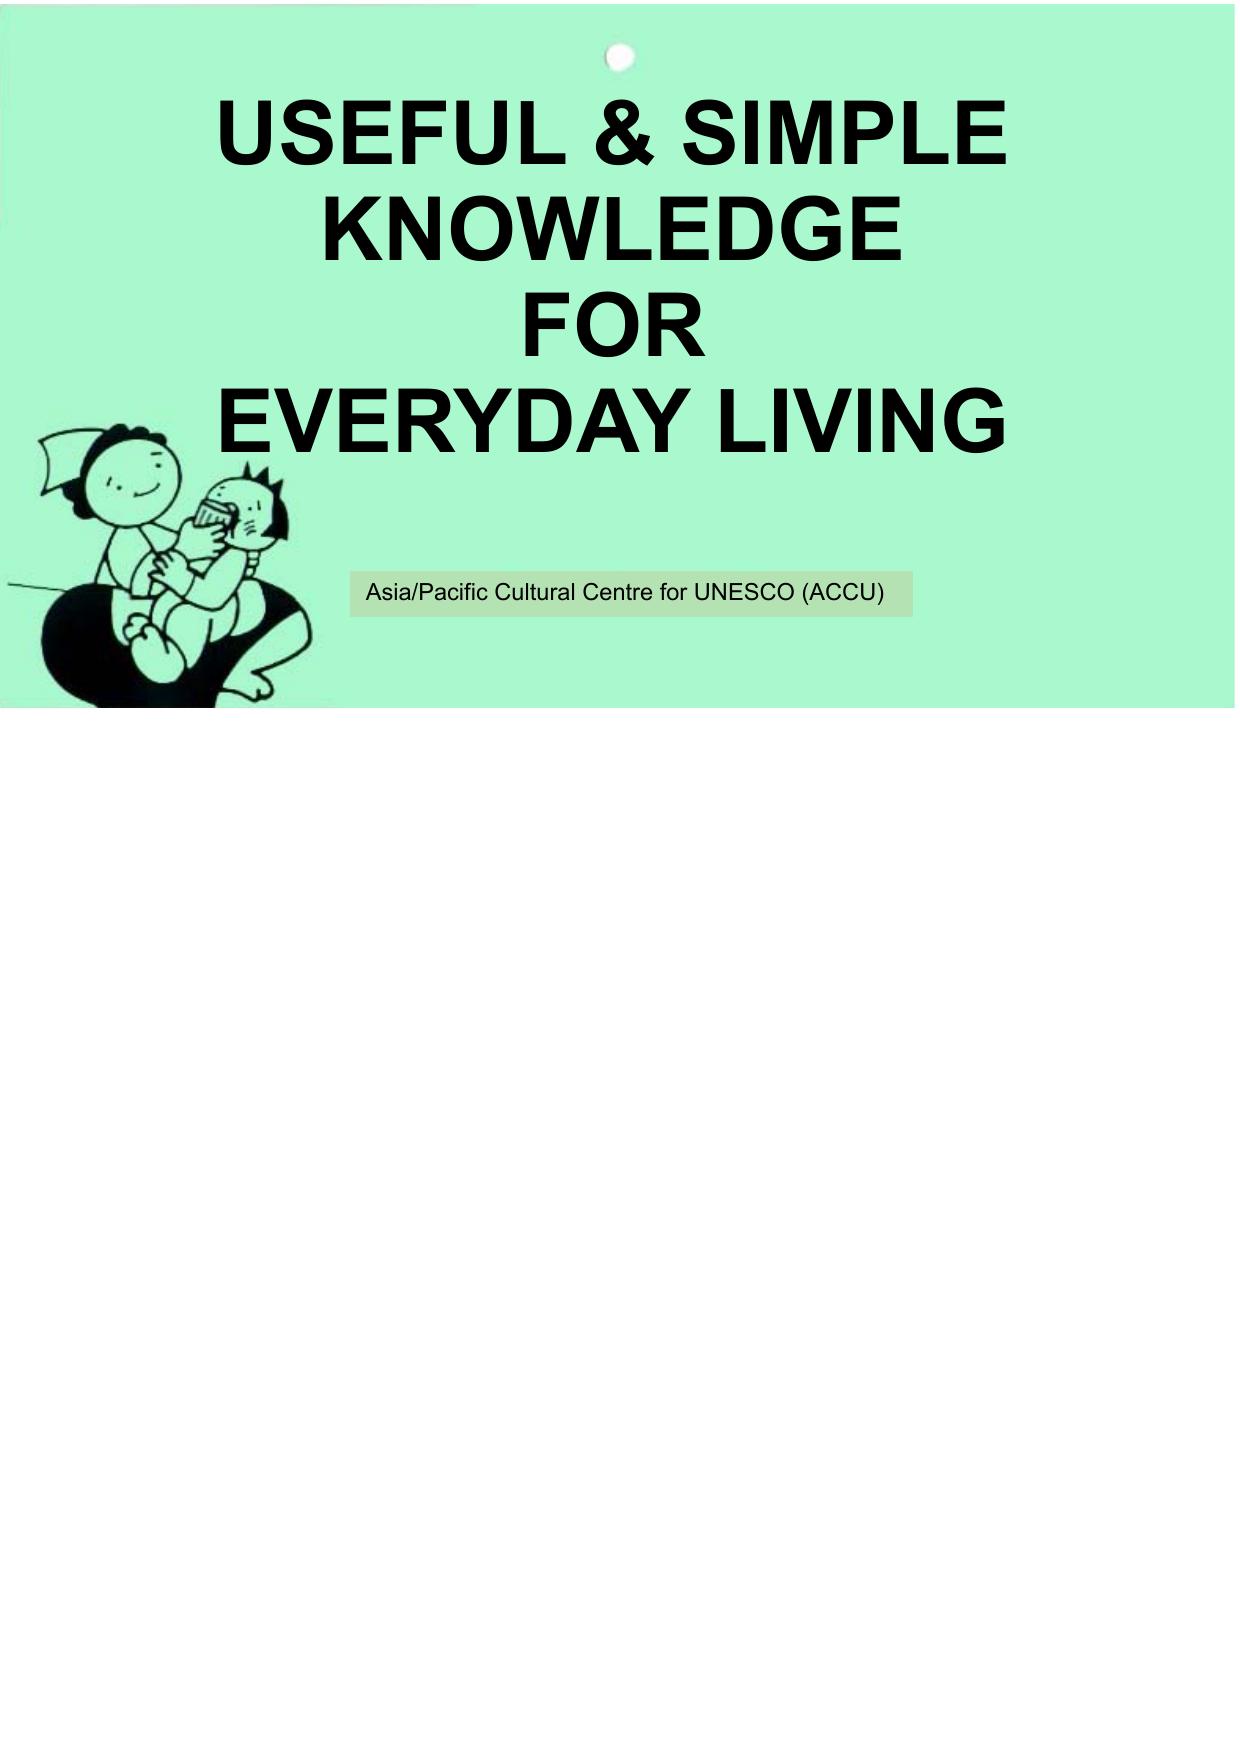 Useful and Simple Knowledge for Everyday Living